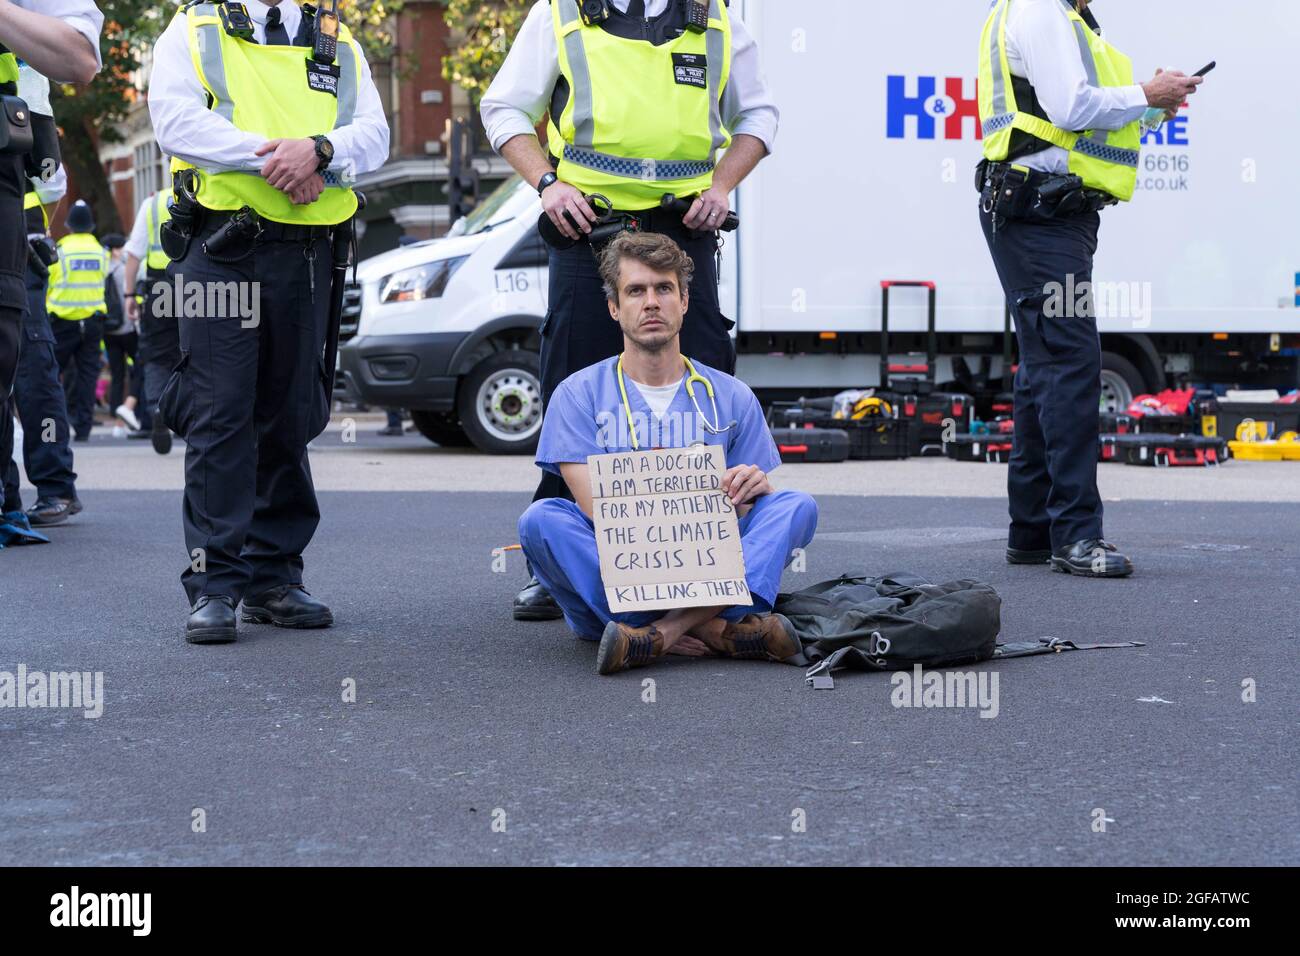 Cambridge Circus, London, UK. 24th August 2021. Climate change protesters from Extinction Rebellion siting at Cambridge Circus , blocking Charing Cross road along the way to Trafalgar Square. Credit: Xiu Bao/Alamy Live News Stock Photo